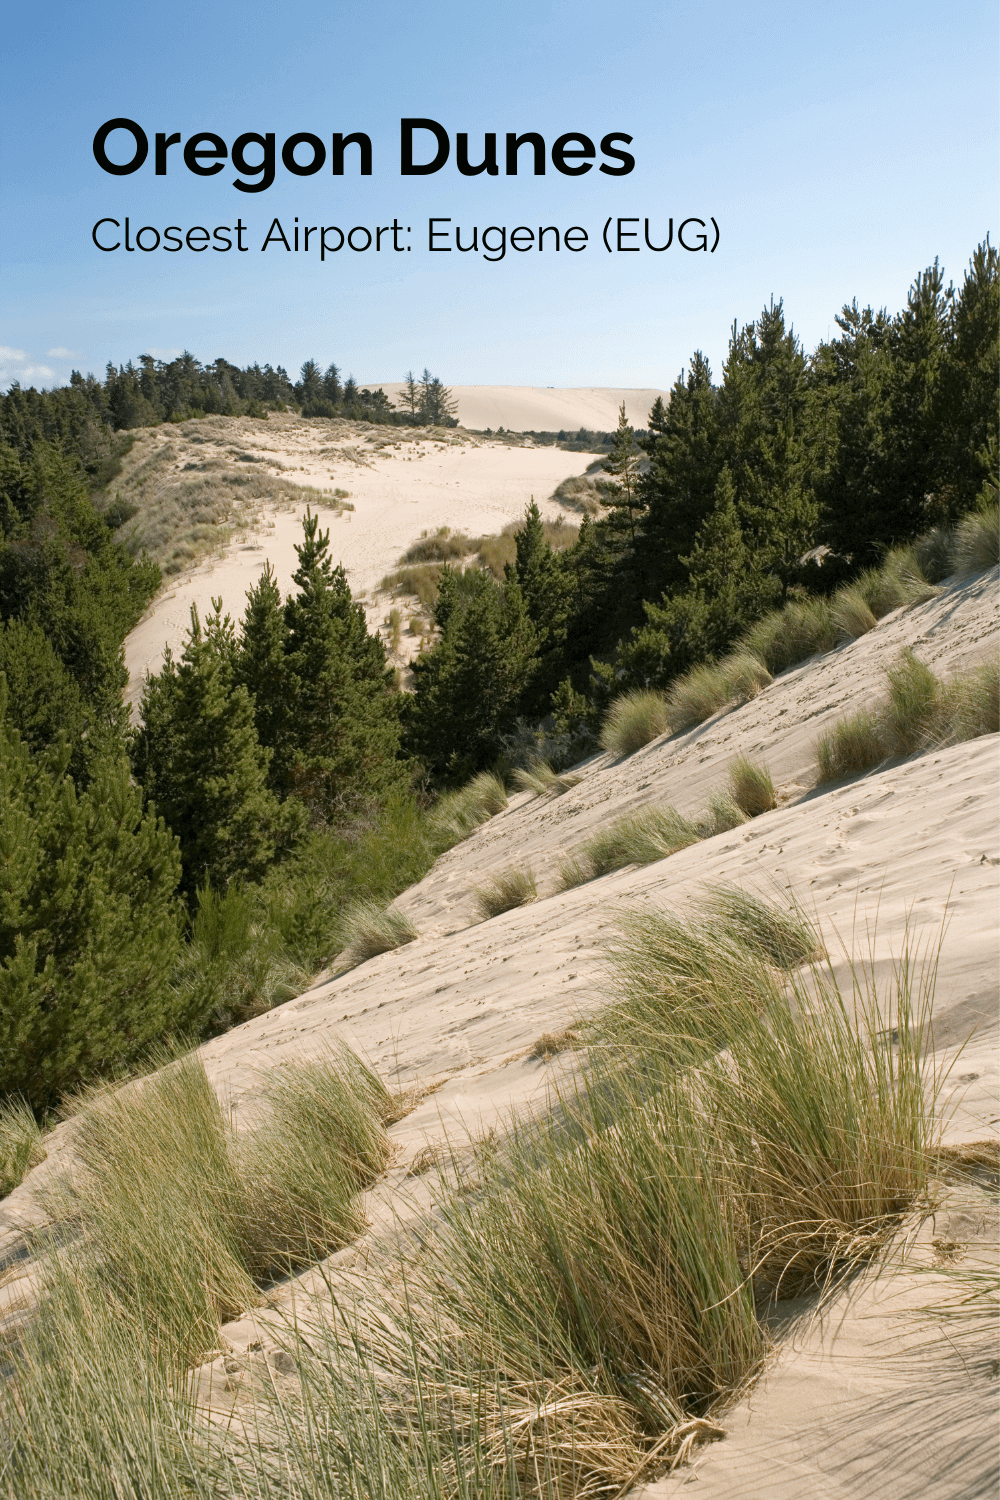 The Dunes in Oregon are impressive with mounds of sands rising over and over along the ocean.  Here, several small pine trees work their way into growth in the sand, amongst beach grasses that all flow together under the blue sky. 